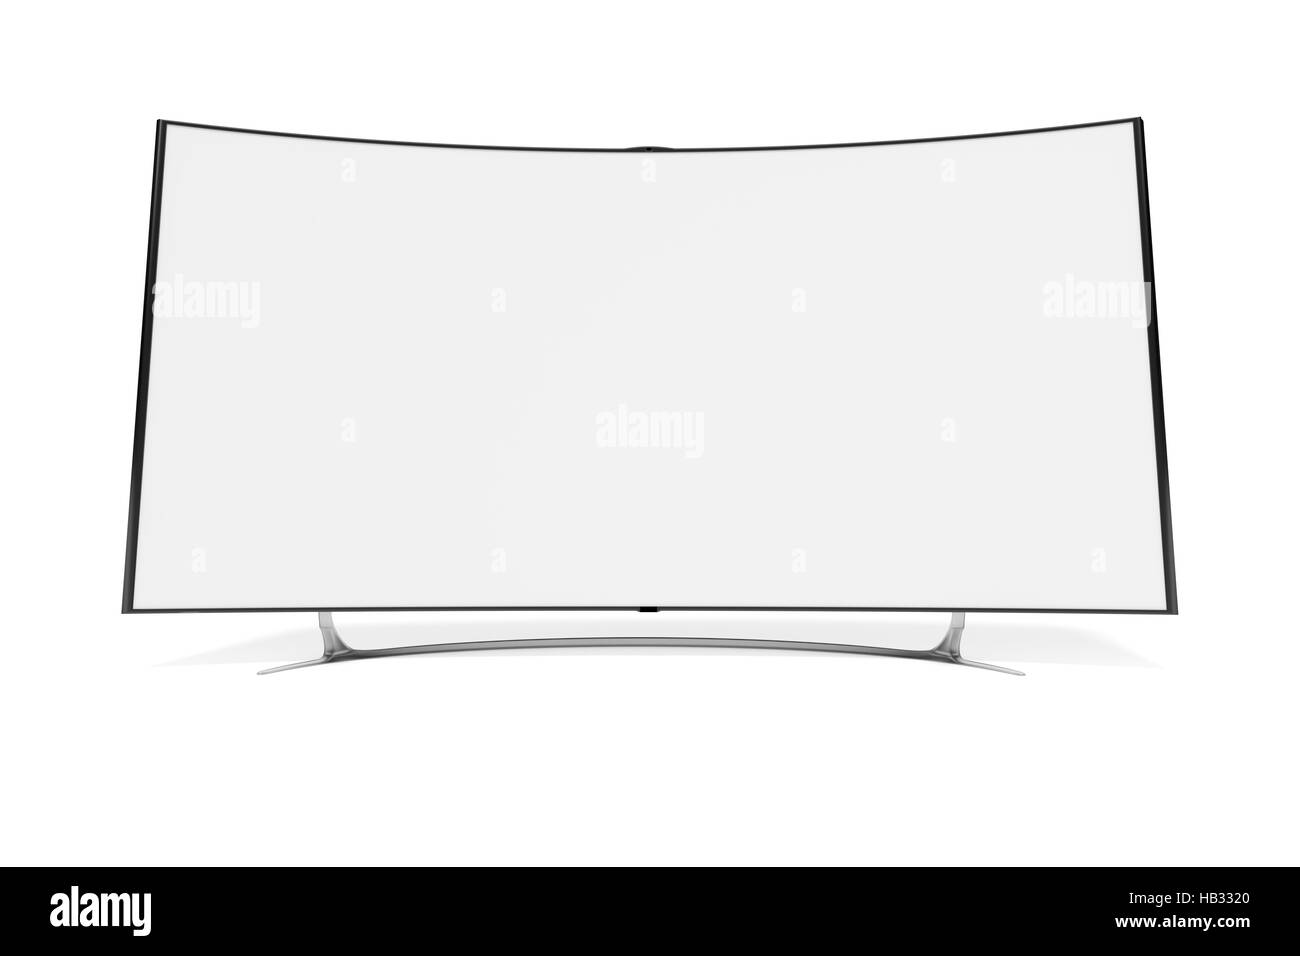 curved widescreen television Stock Photo